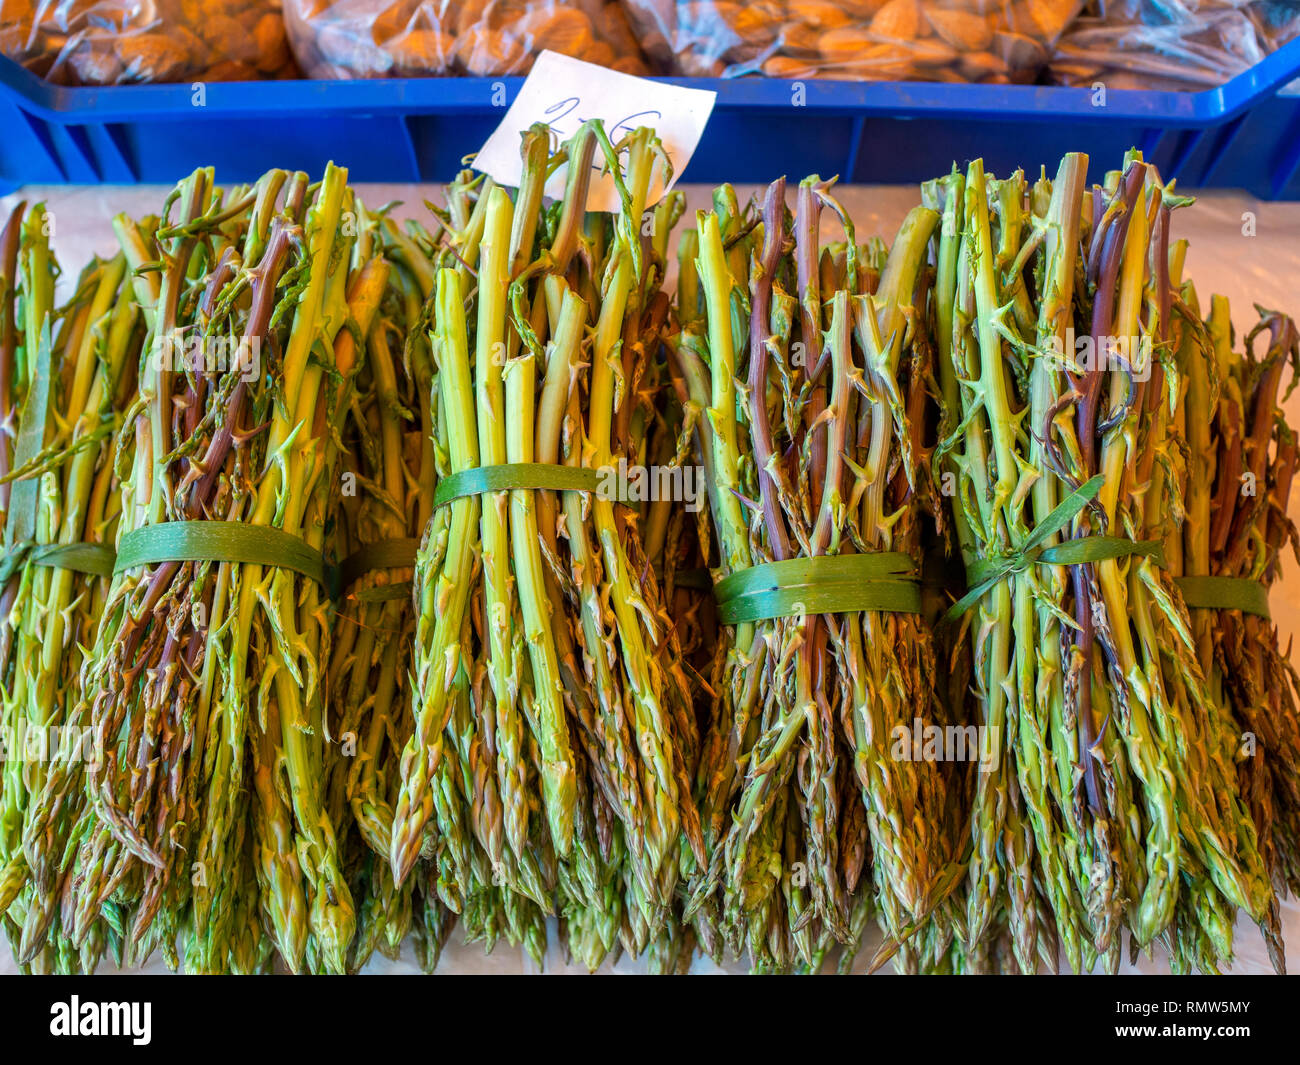 Late season asparagus with bolting spears at a Lagos vegetable market, Portugal Stock Photo